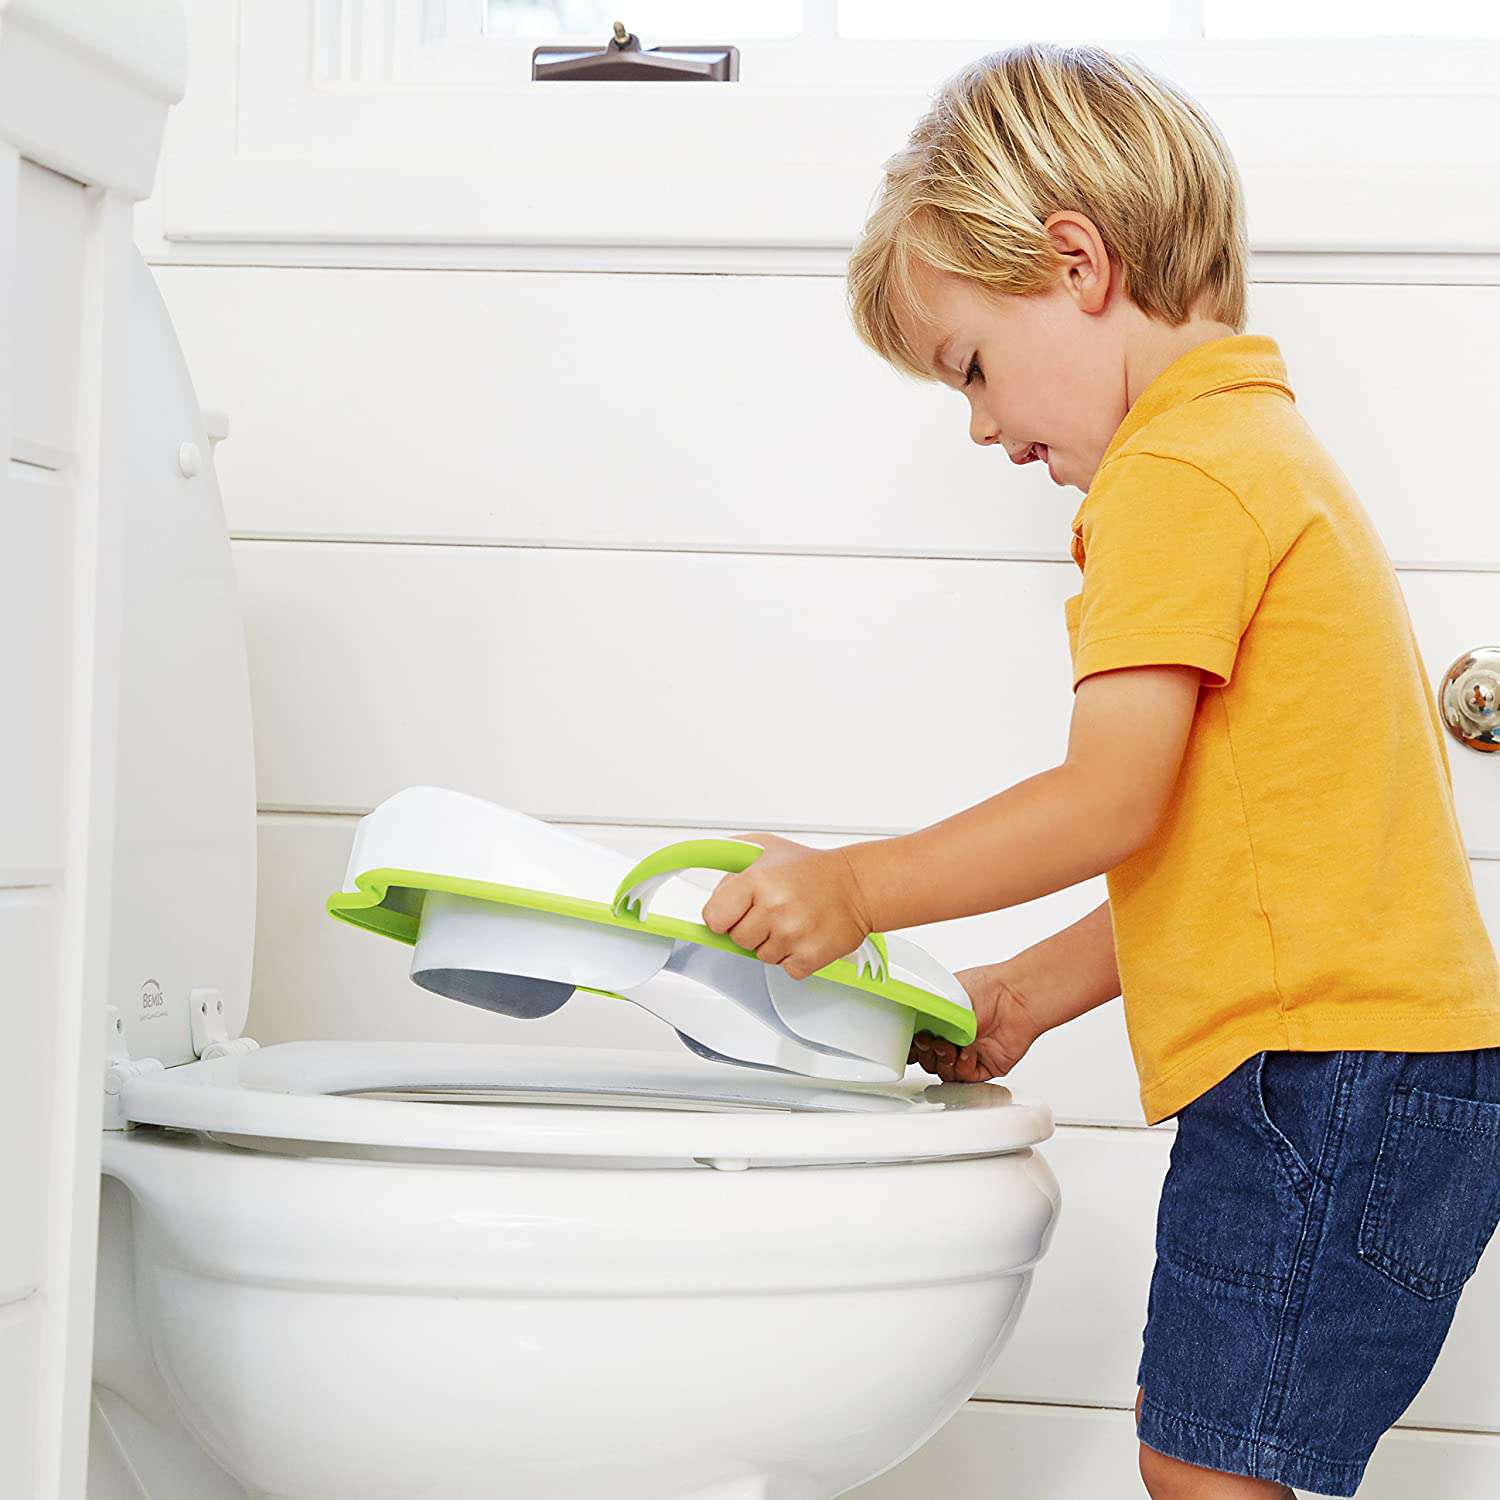 What Do You Put in the Toilet for Potty Training?